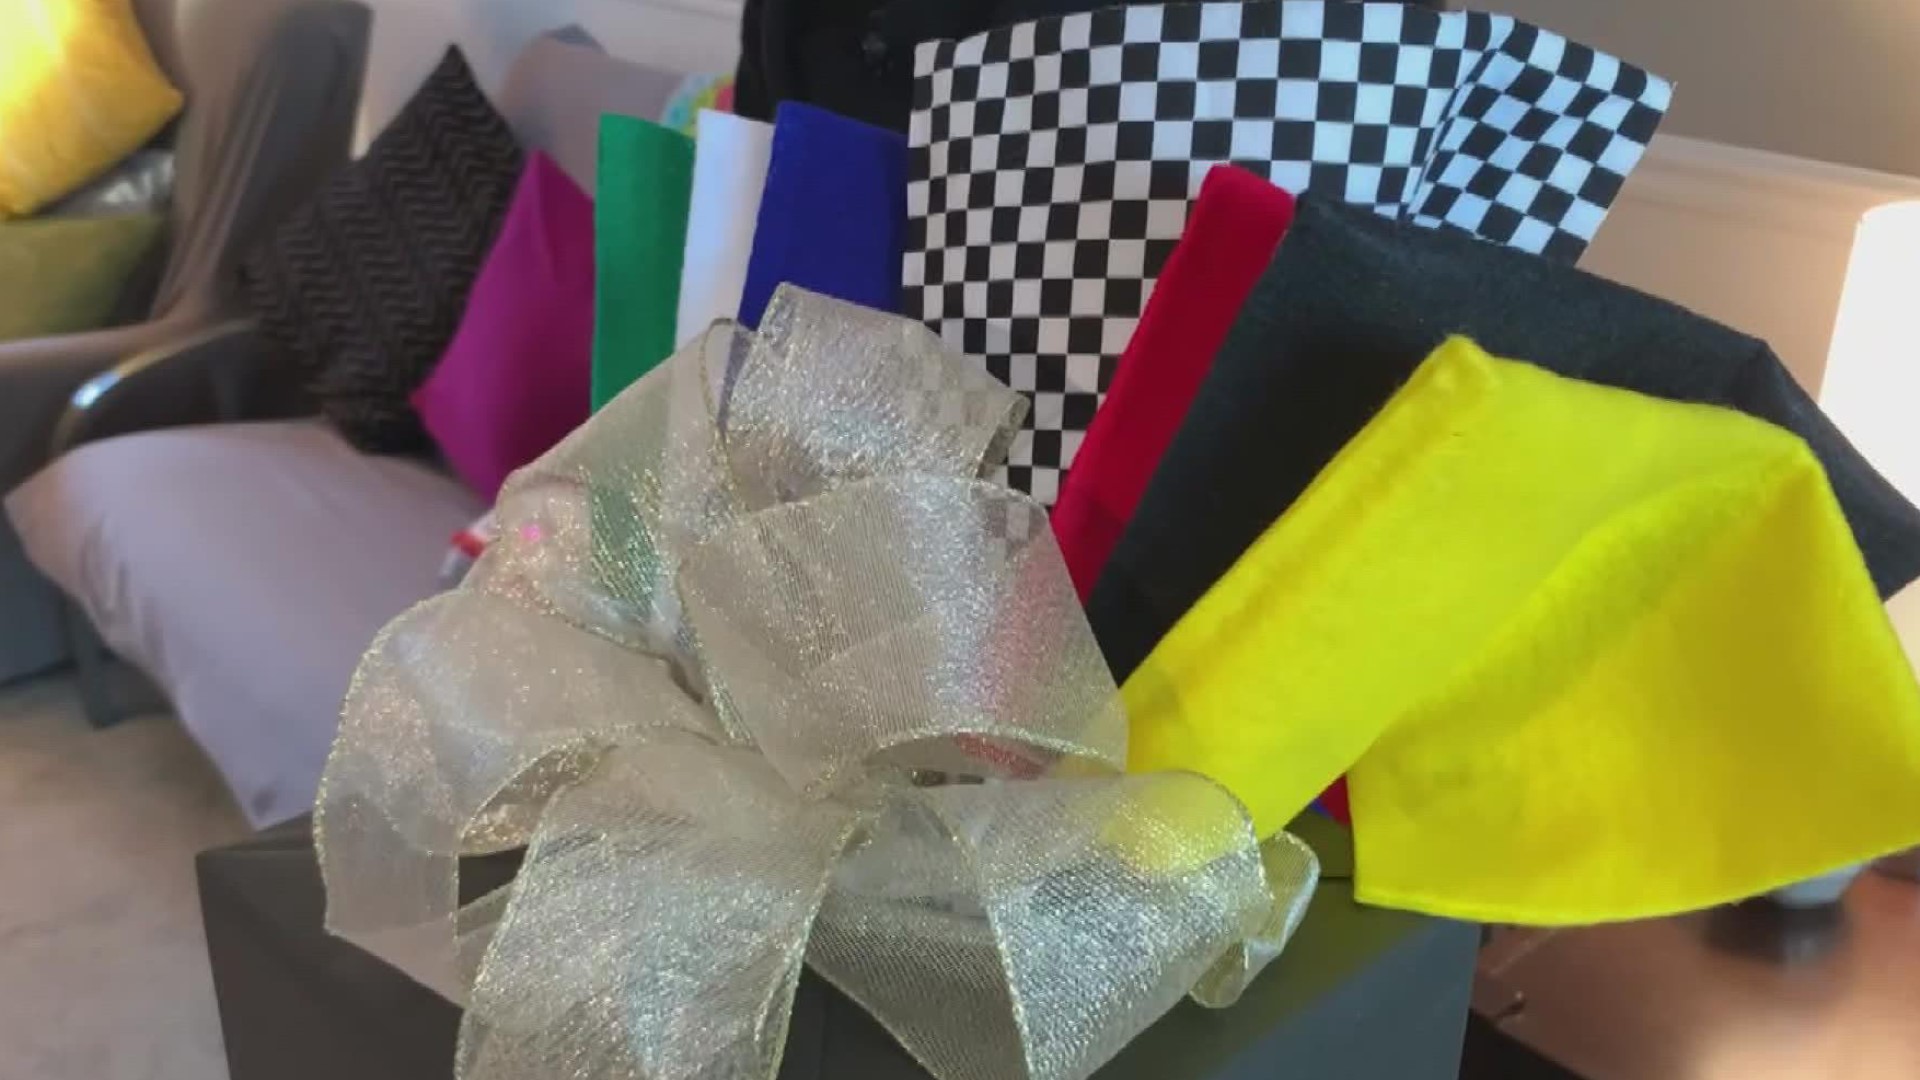 Amber Blakley said her business has become so popular over the last two years that she's wrapping gifts year round.